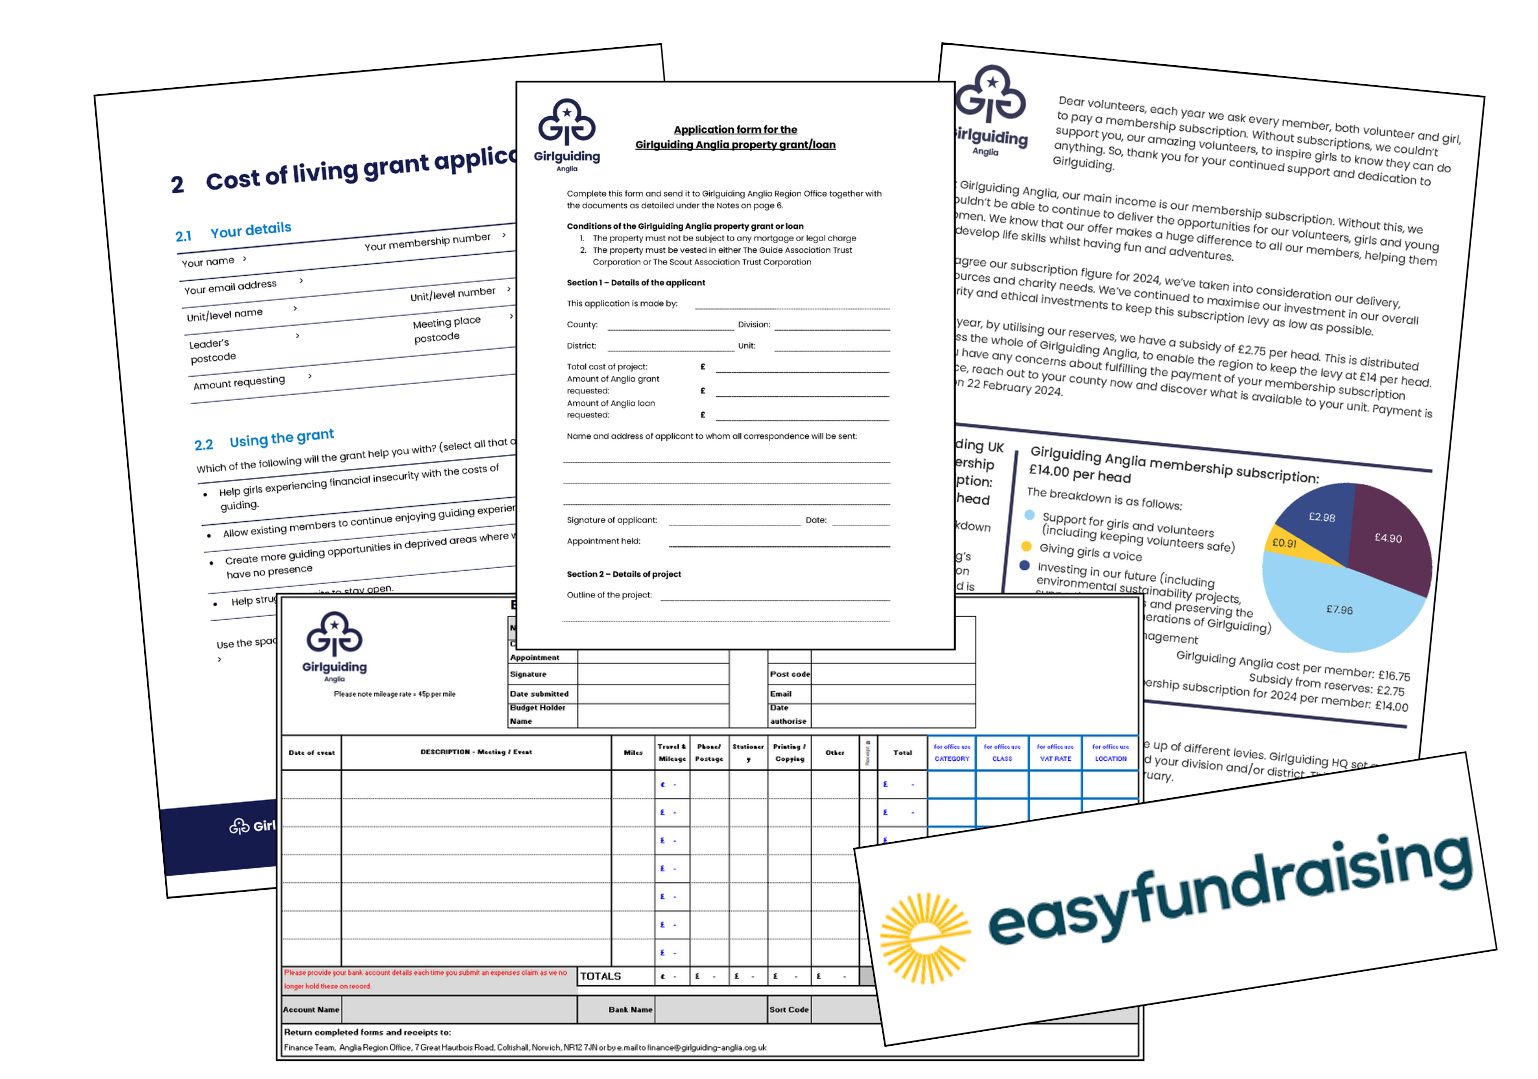 image relating to Finance, fundraising and forms